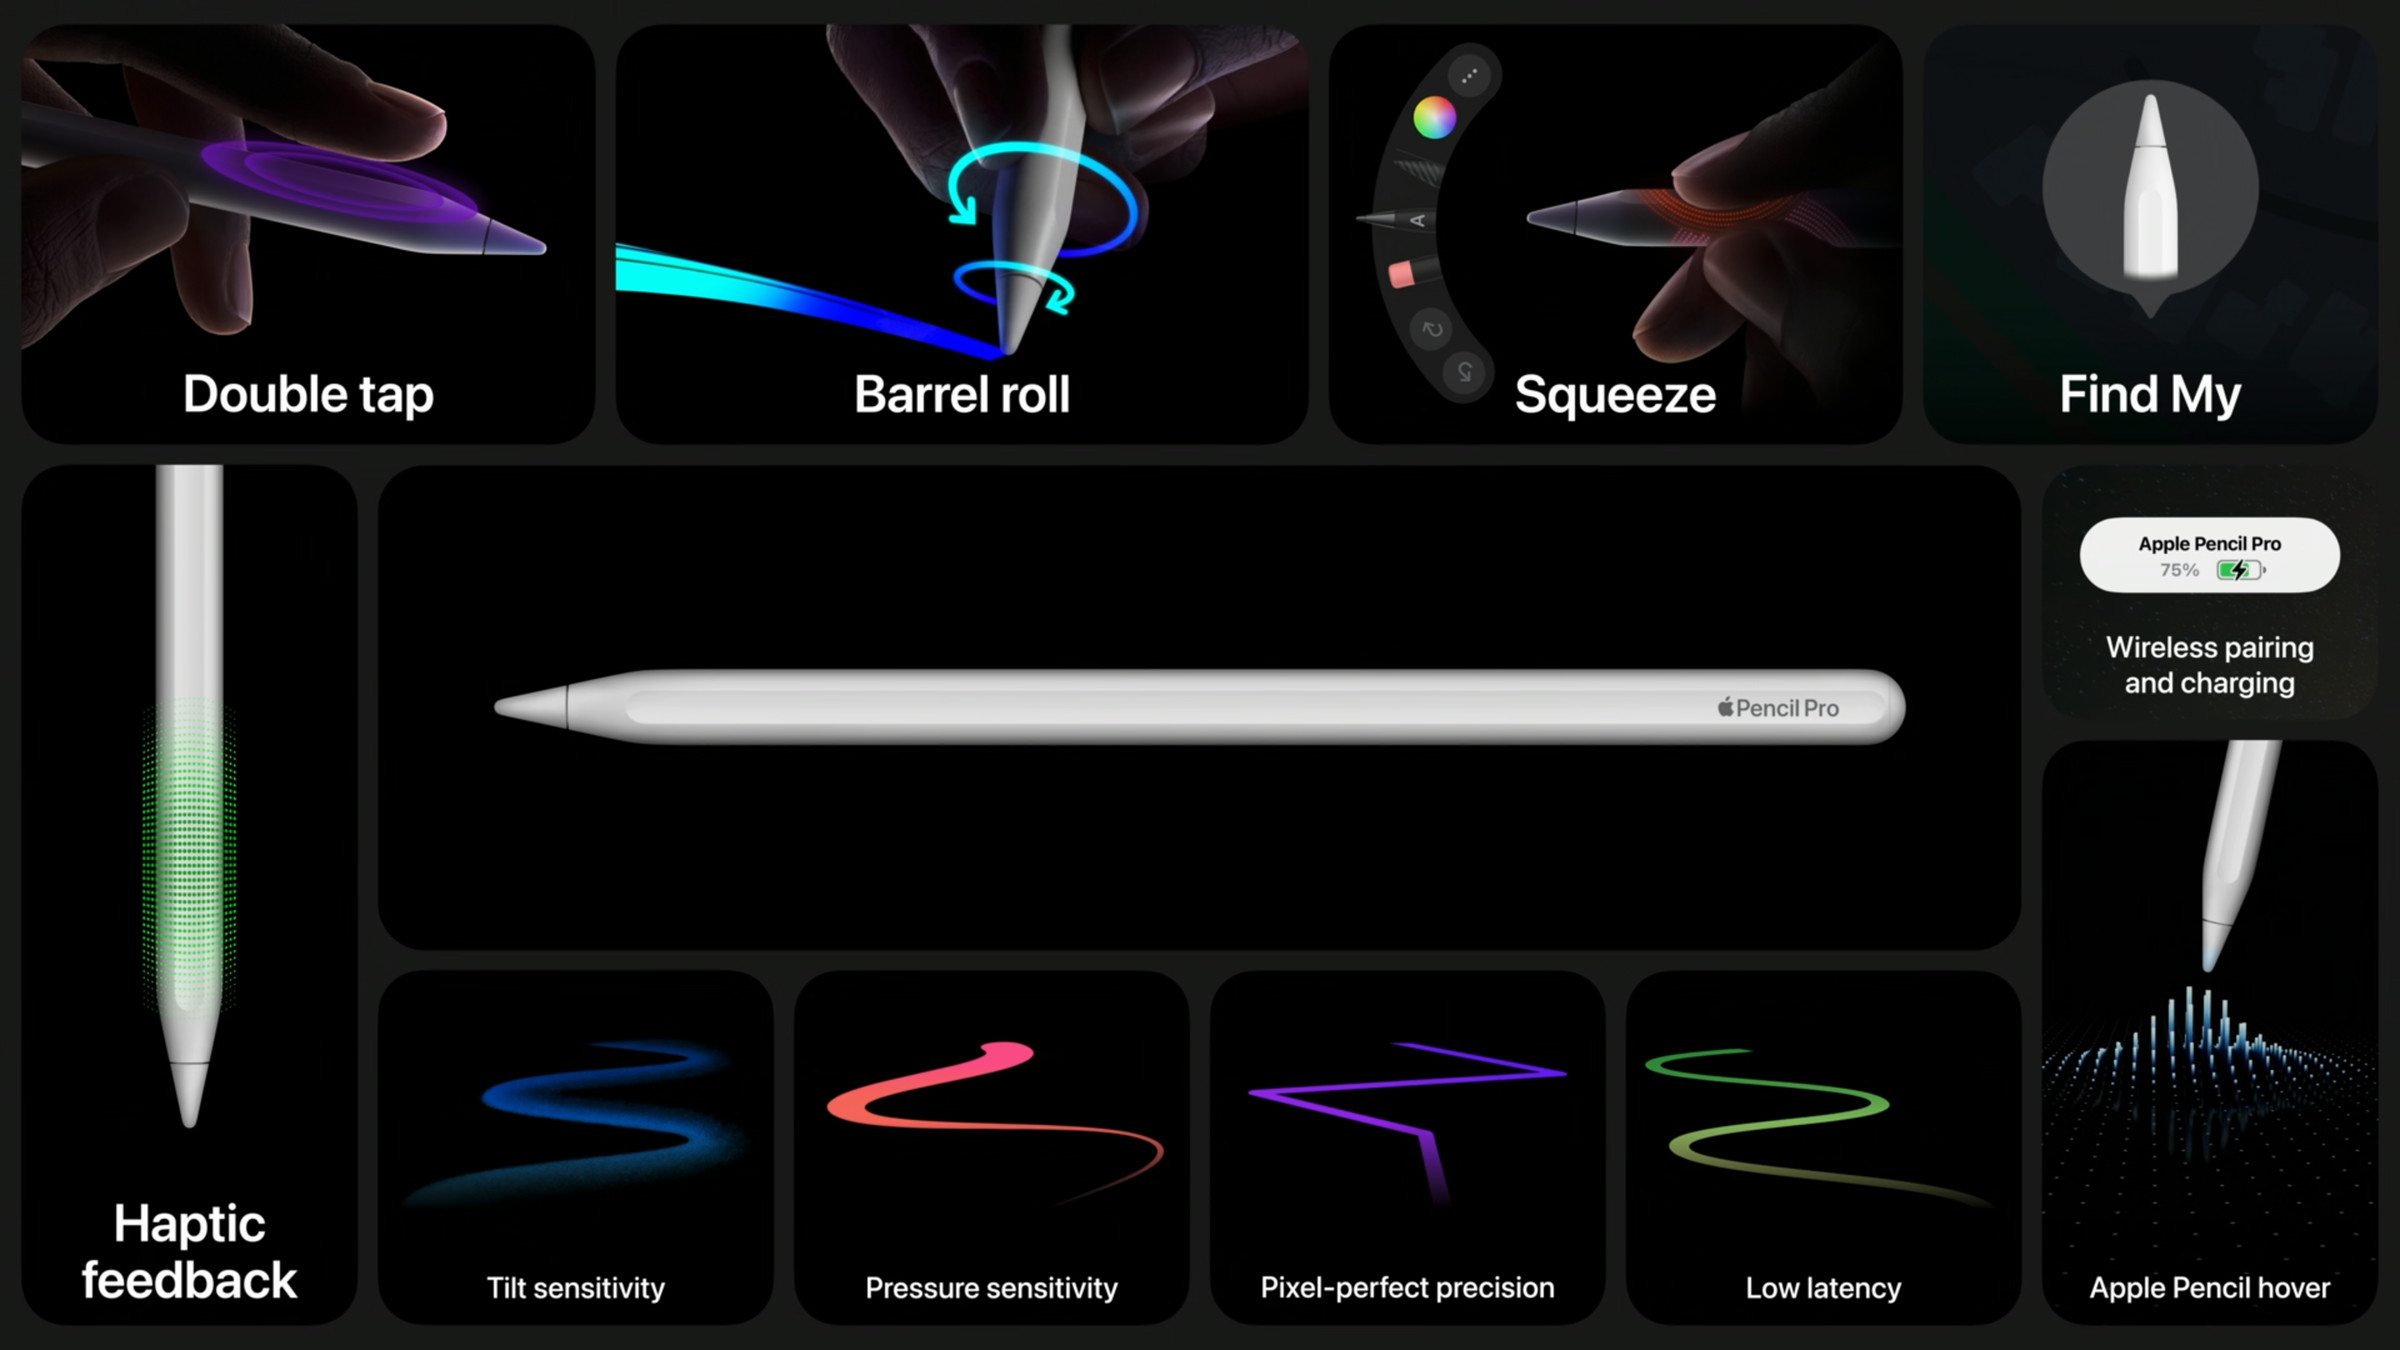 A screenshot taken from Apple’s Let Loose iPad presentation showing the new Apple Pencil Pro features.